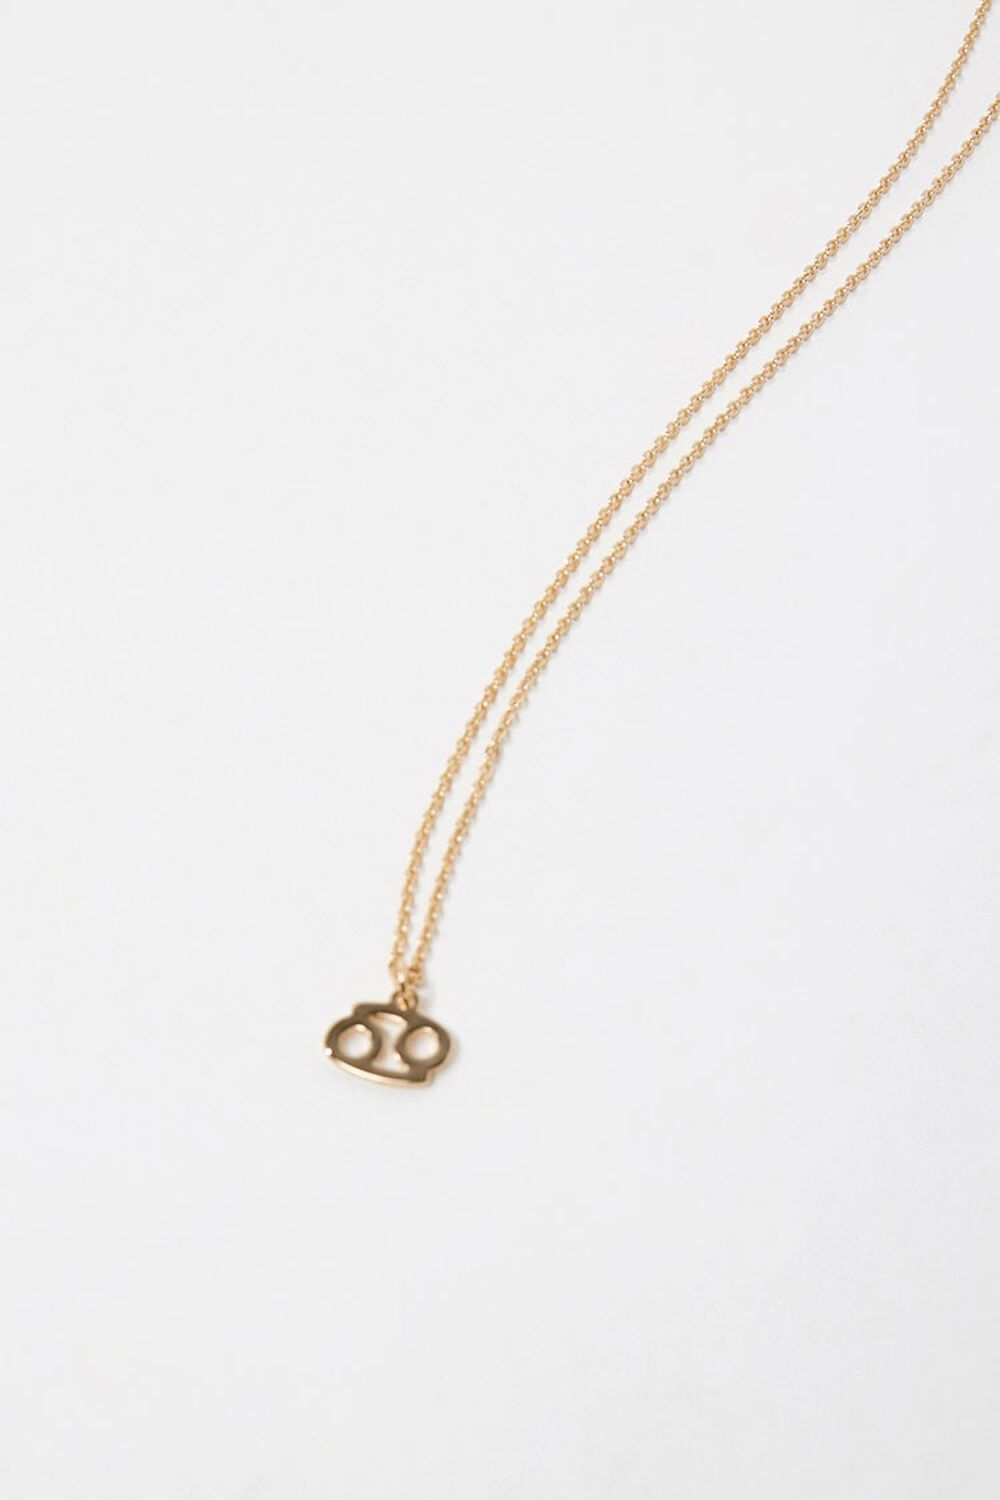 GOLD Cancer Charm Necklace, image 1